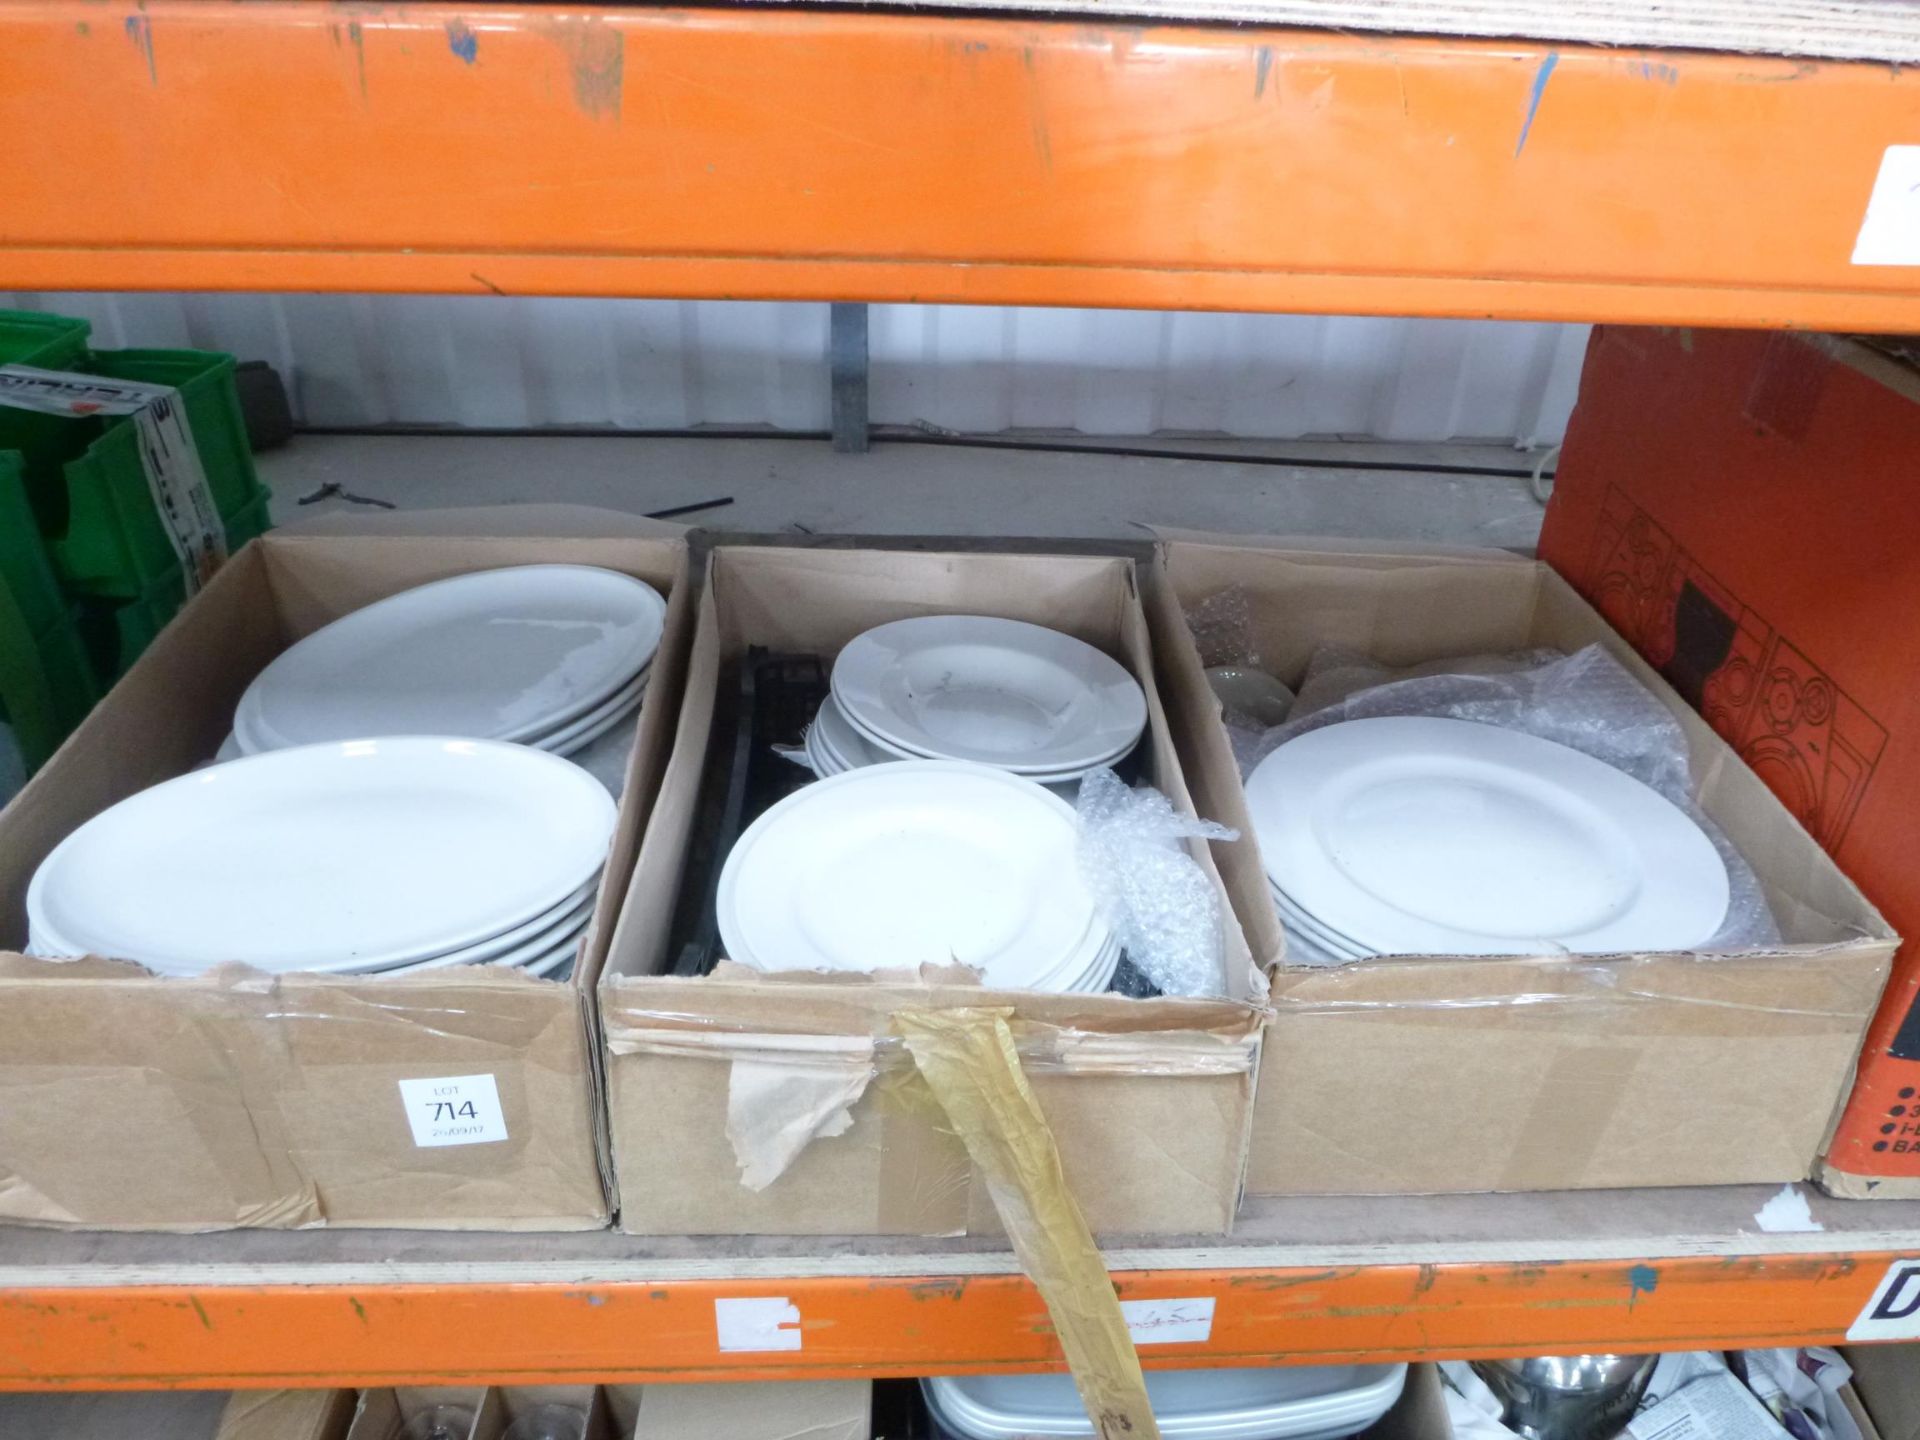 3 x Boxes of Restaurant Cutlery and Plates etc